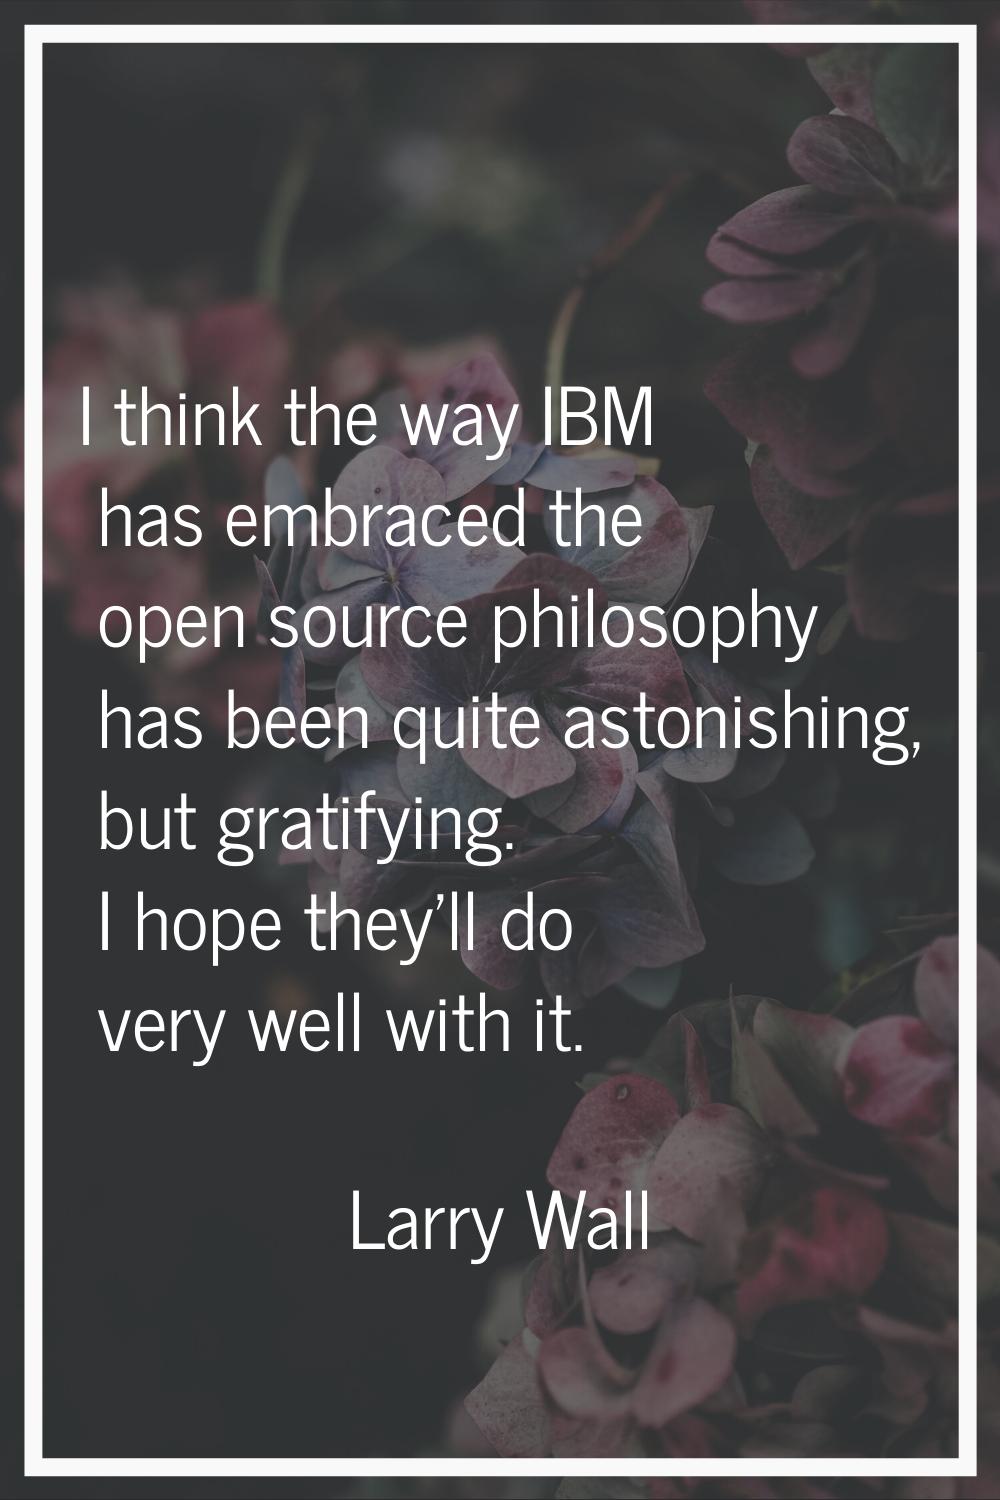 I think the way IBM has embraced the open source philosophy has been quite astonishing, but gratify